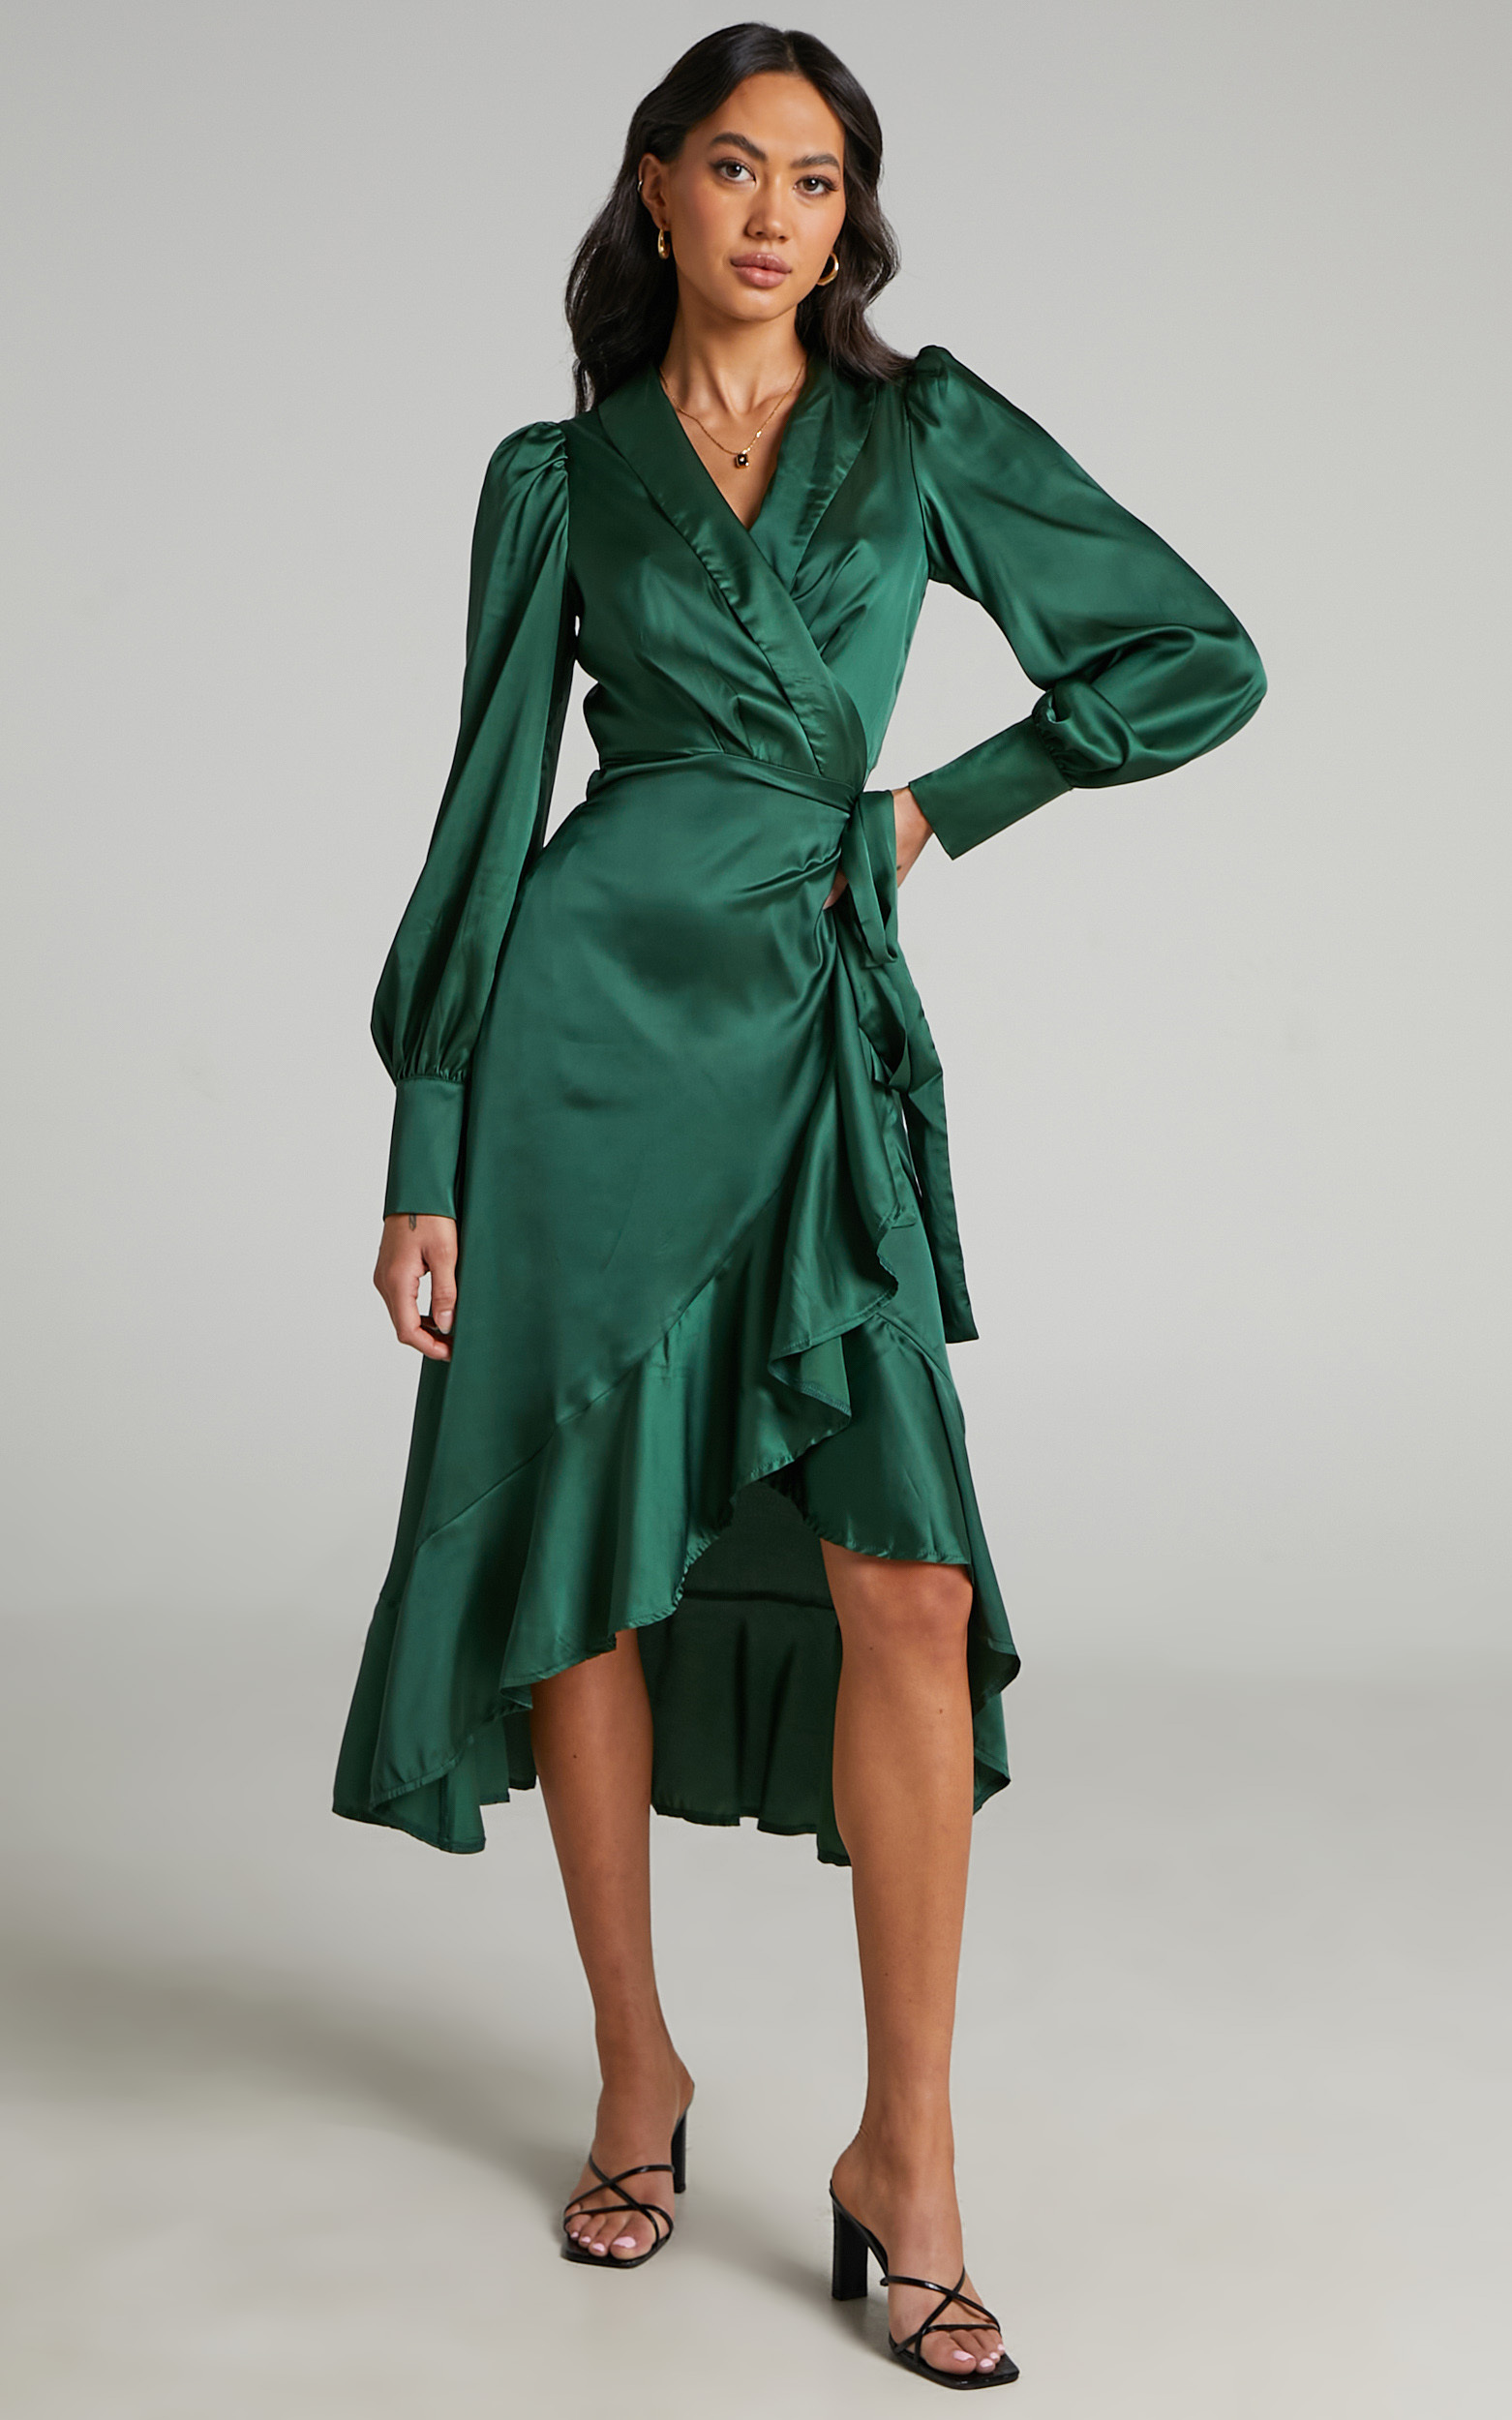 Rada Long Sleeve Frill Wrap Midi Dress in Forest Green - 04, GRN1, hi-res image number null